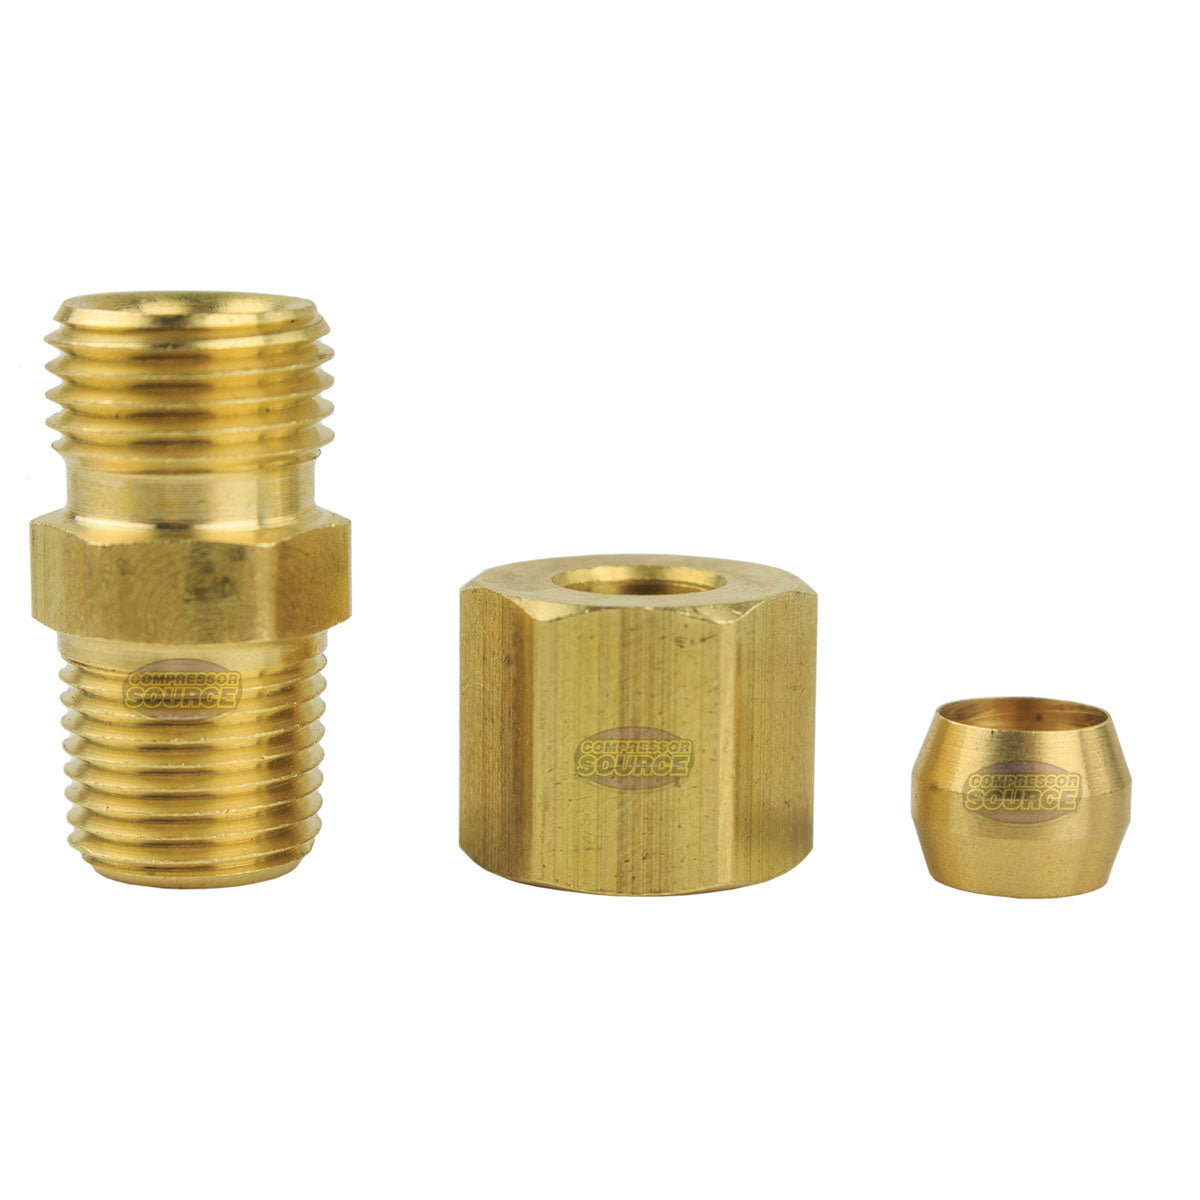 1/4" x 1/8" Compression x Male NPT Adapter Pipe Fitting Tube Connector Ferrule